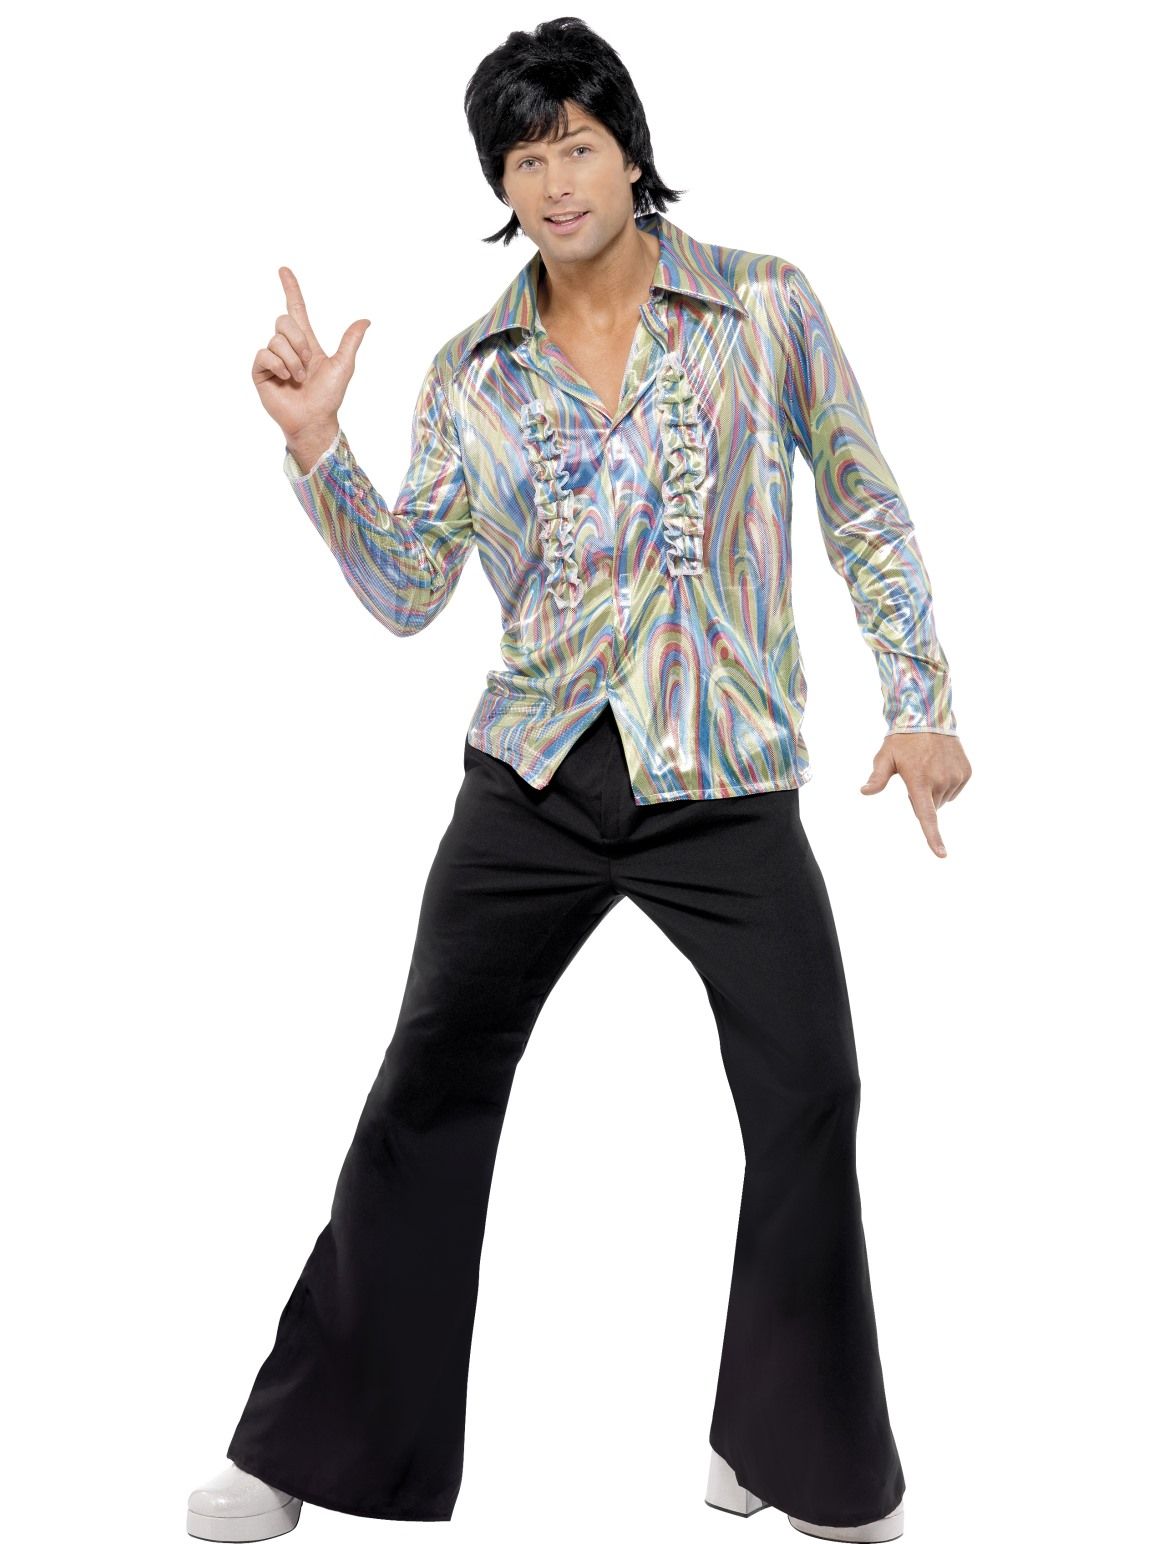 Psychedelic Shirt Retro Disco Flares Costume Mens Hippy 60s 70s ...